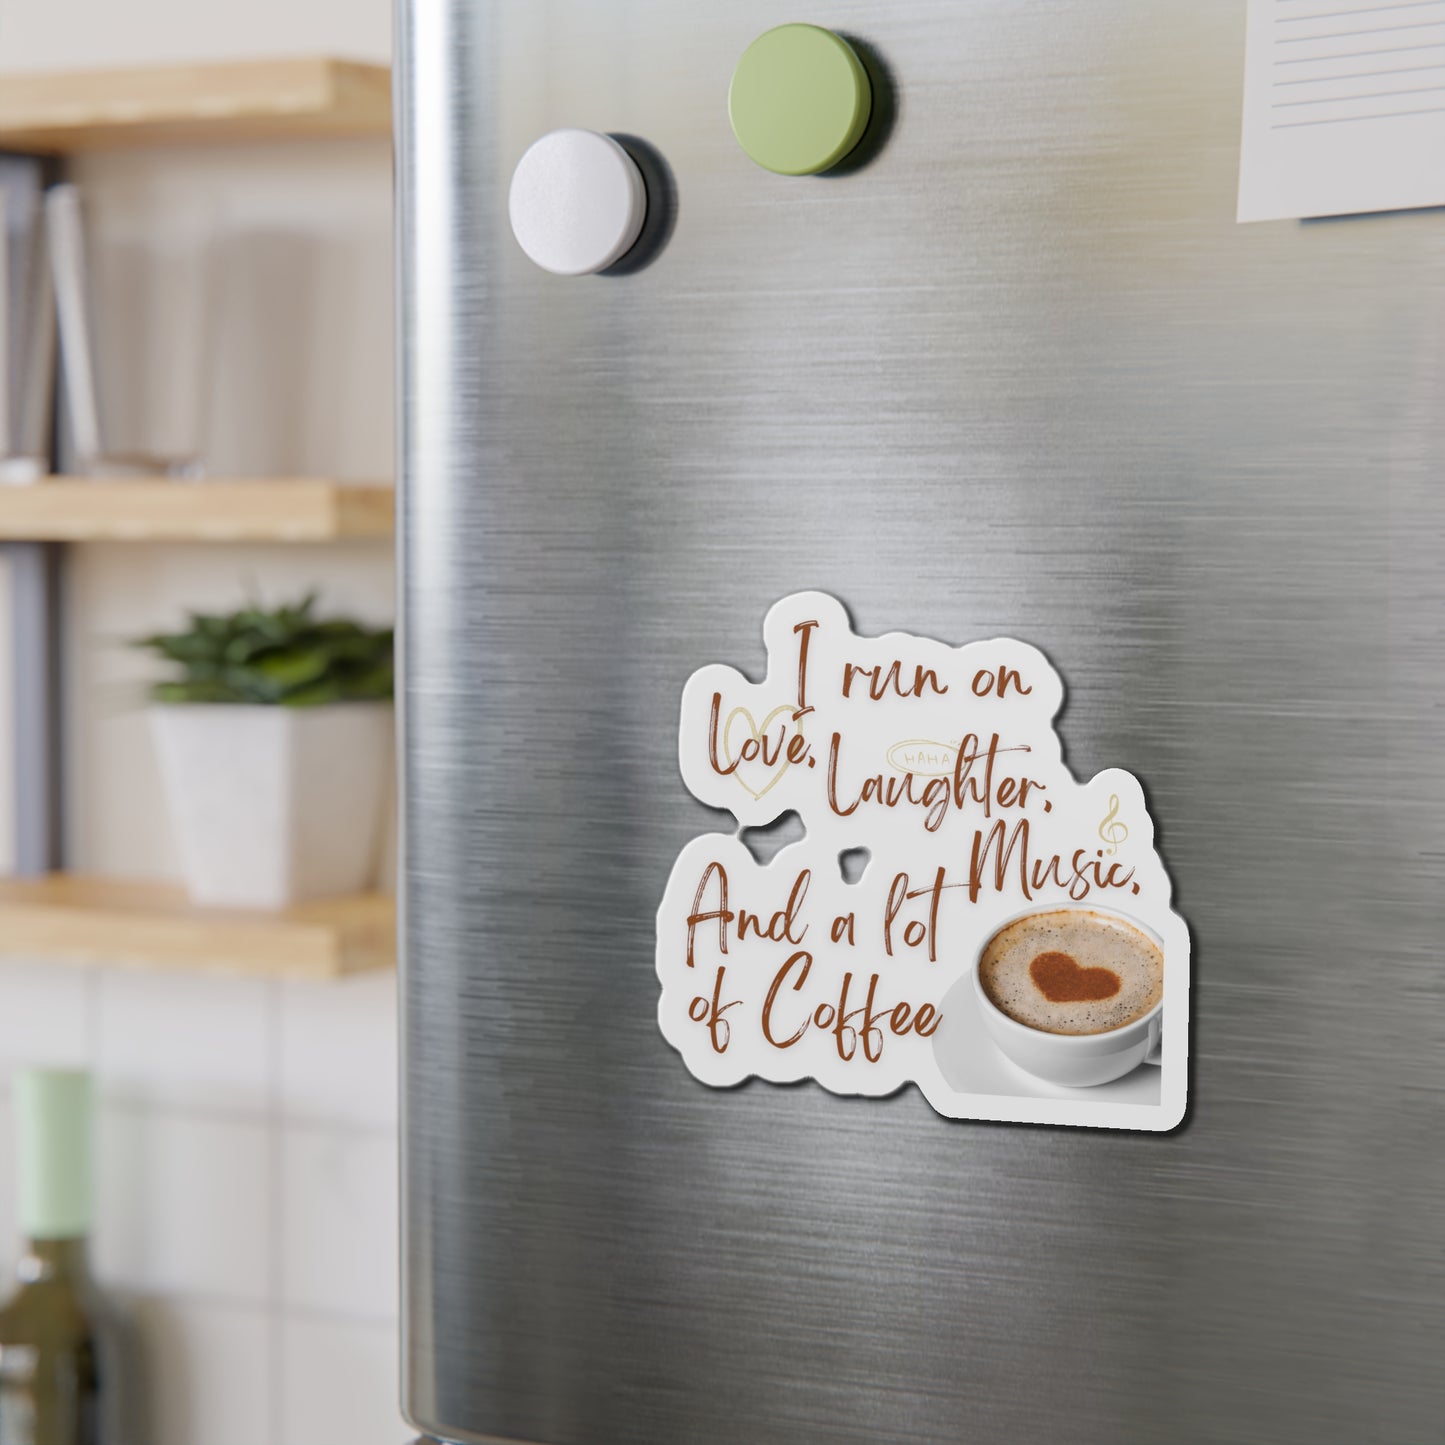 Coffee Die-Cut Magnets Just for fun